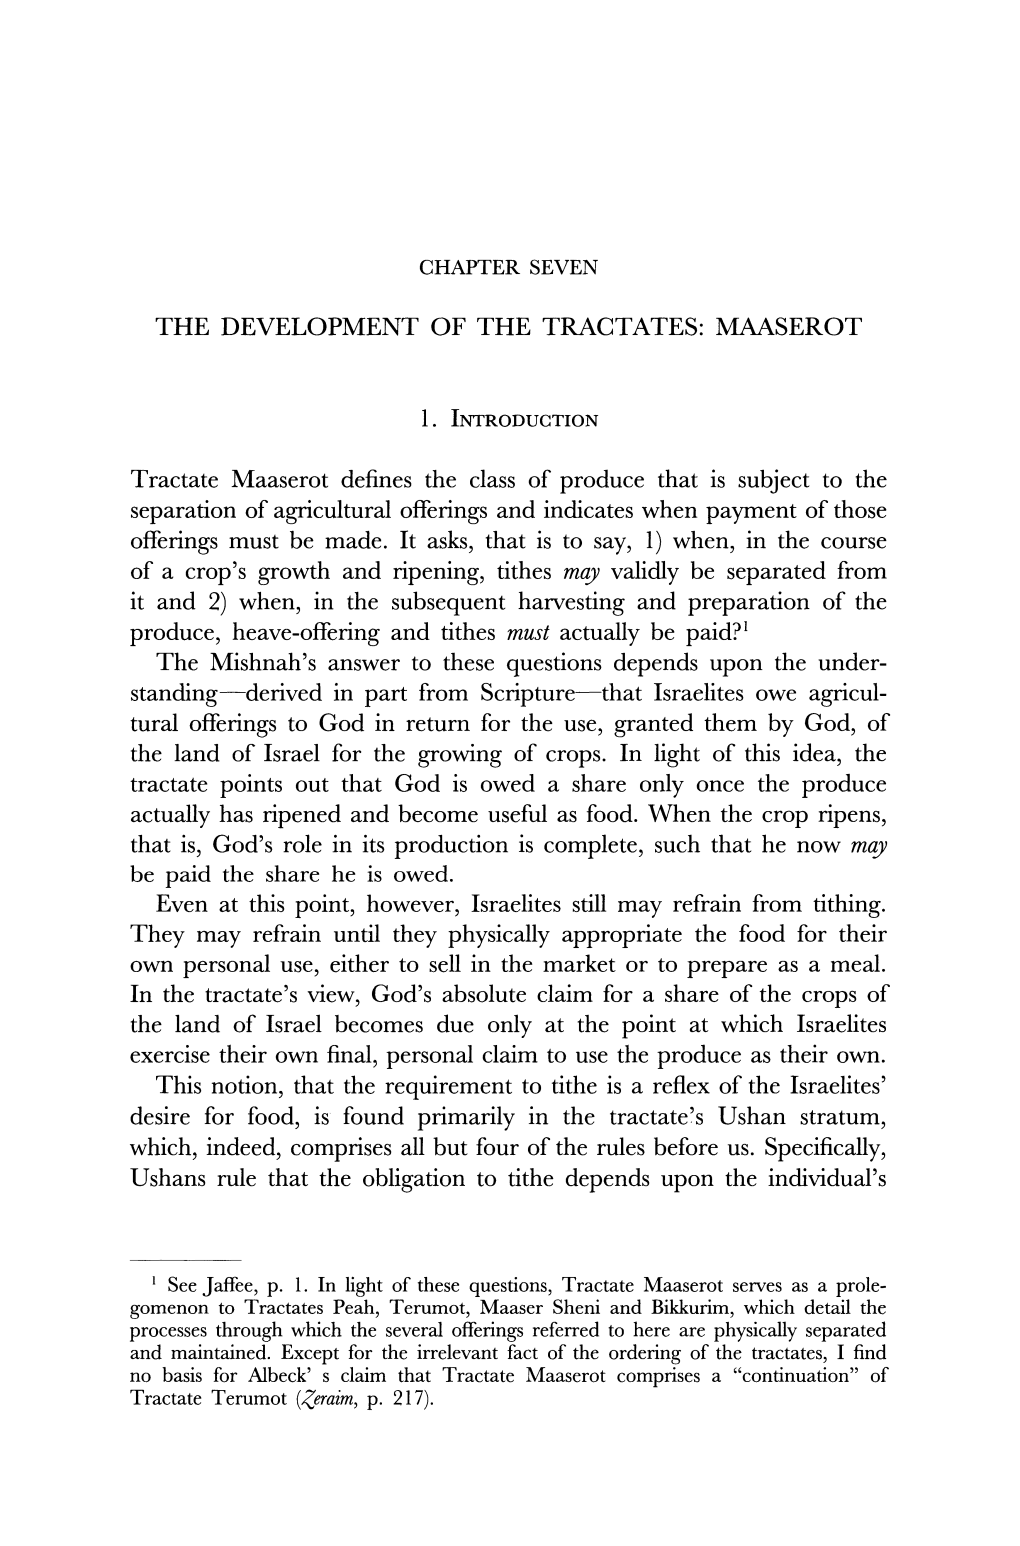 The Development of the Tractates: Maaserot